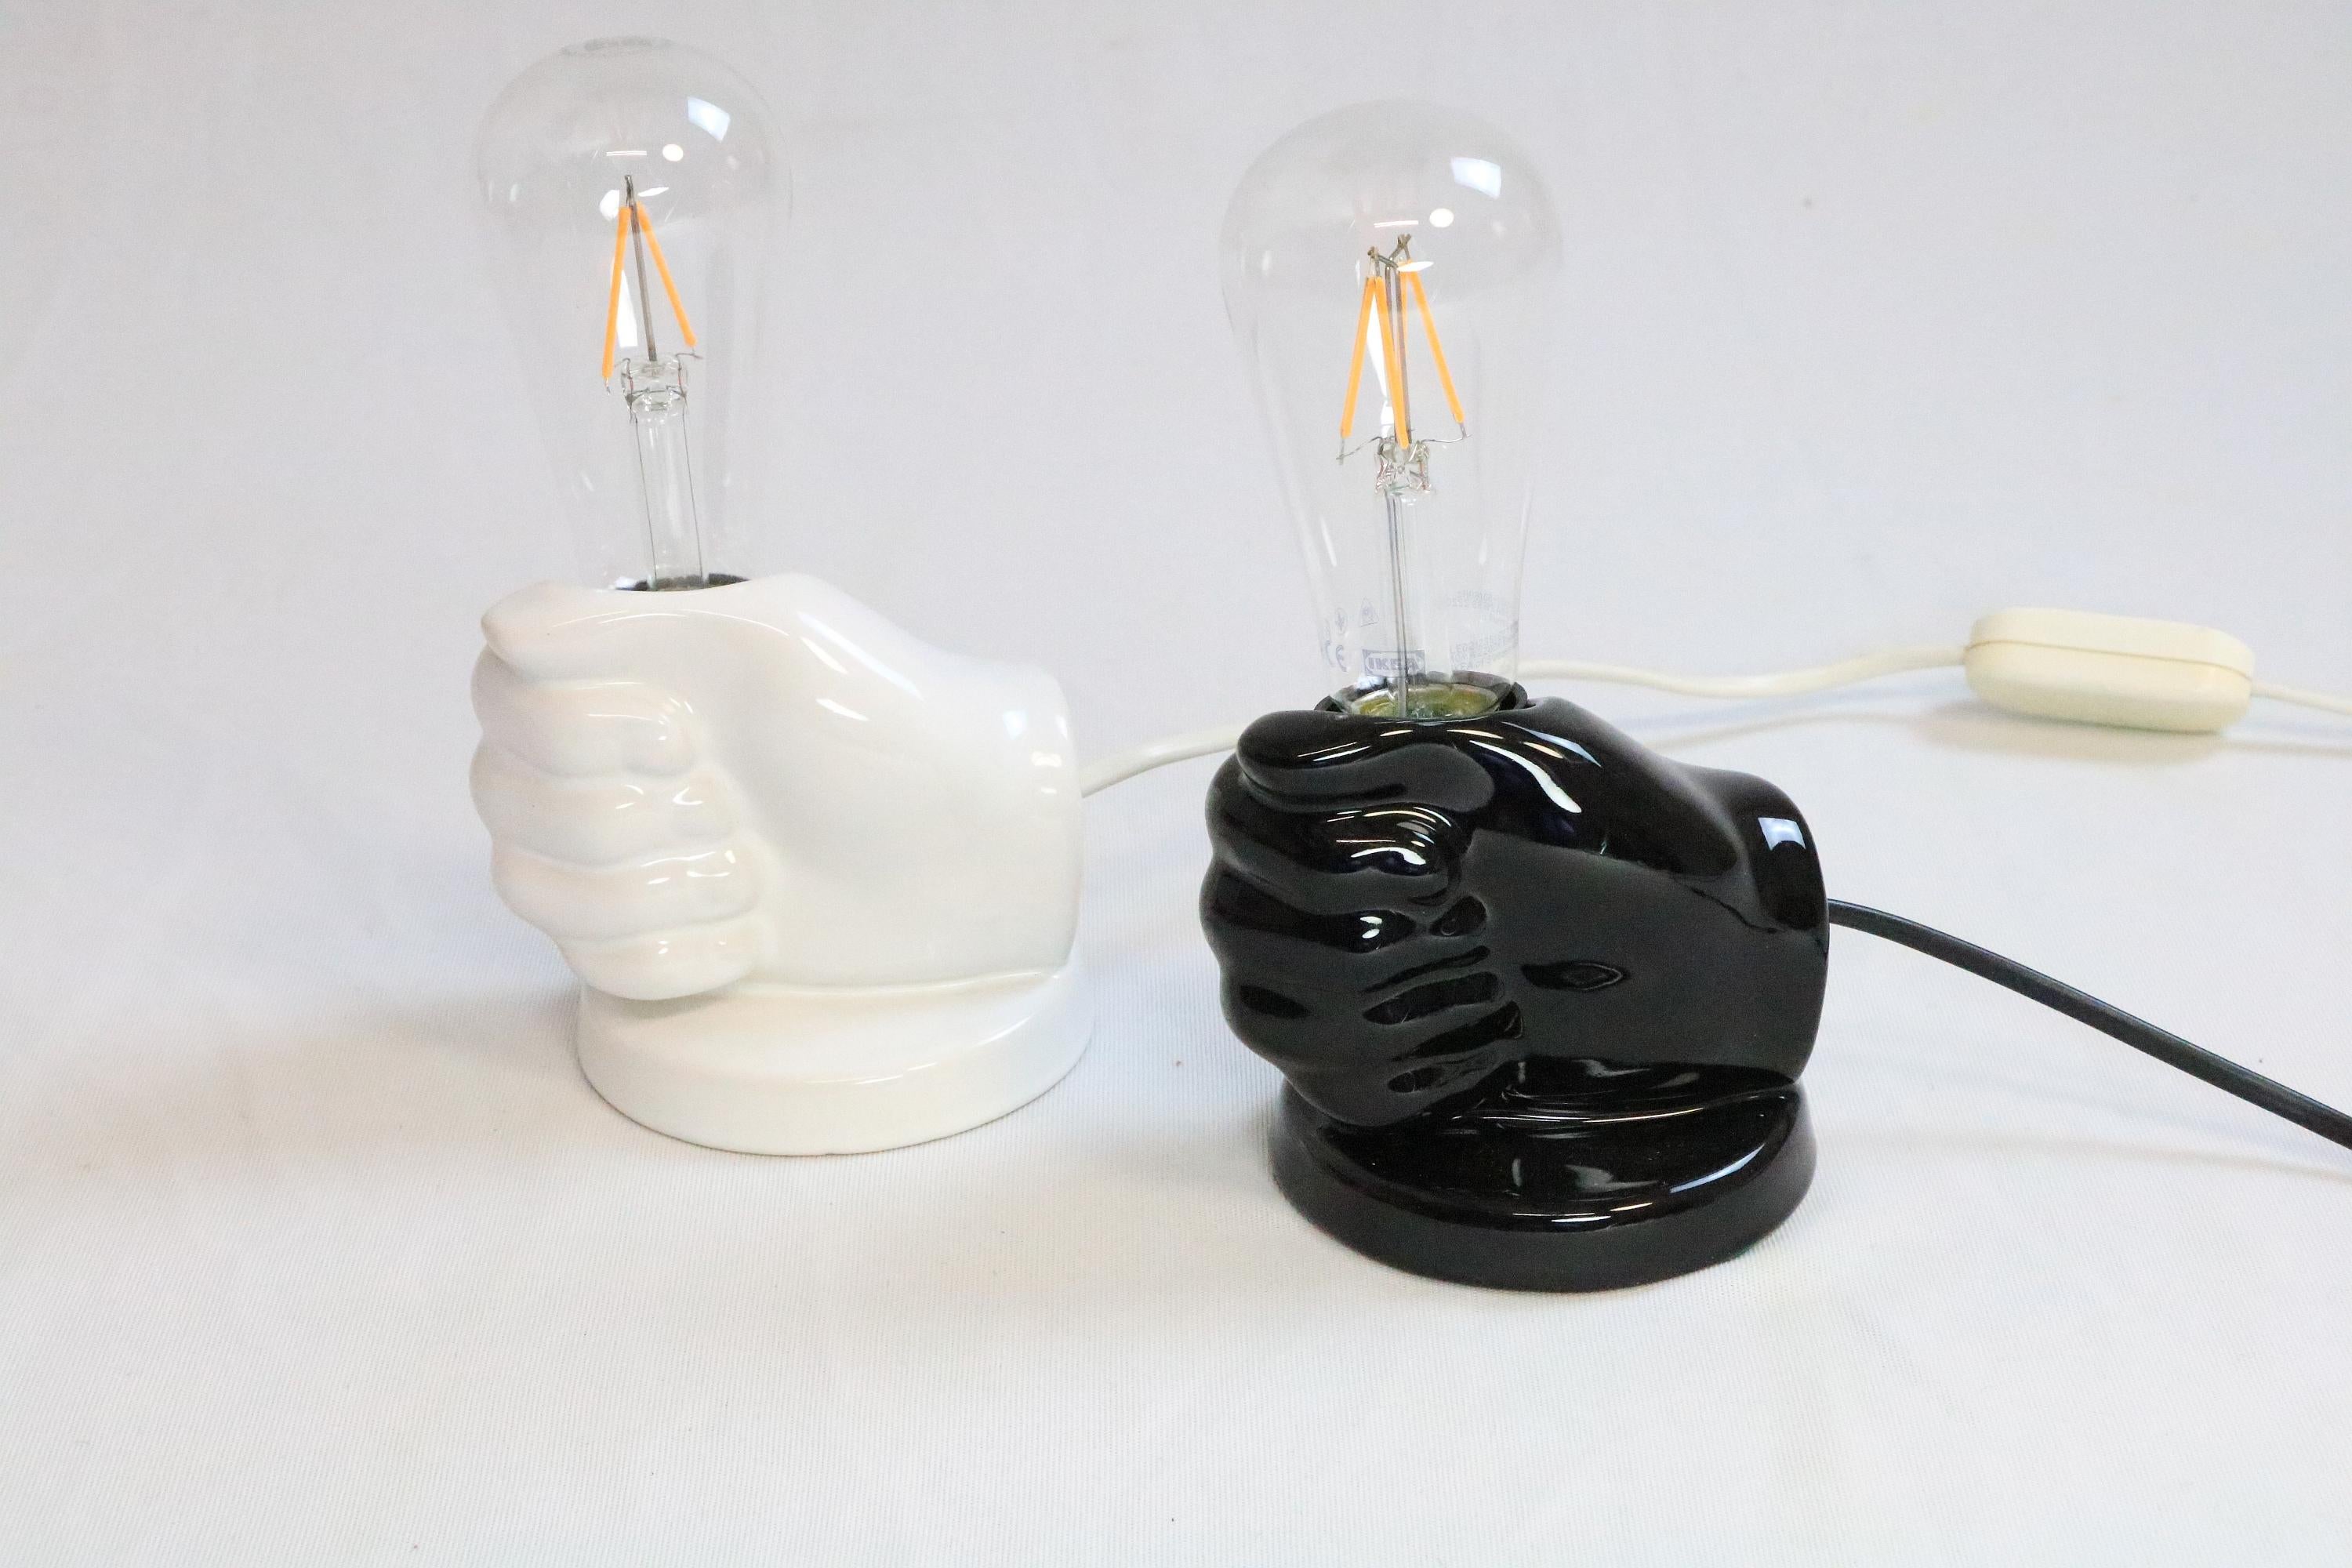 2 x Small Pottery Table Lamp, Hand, Black / White, 1980s, by Aro Germany For Sale 5